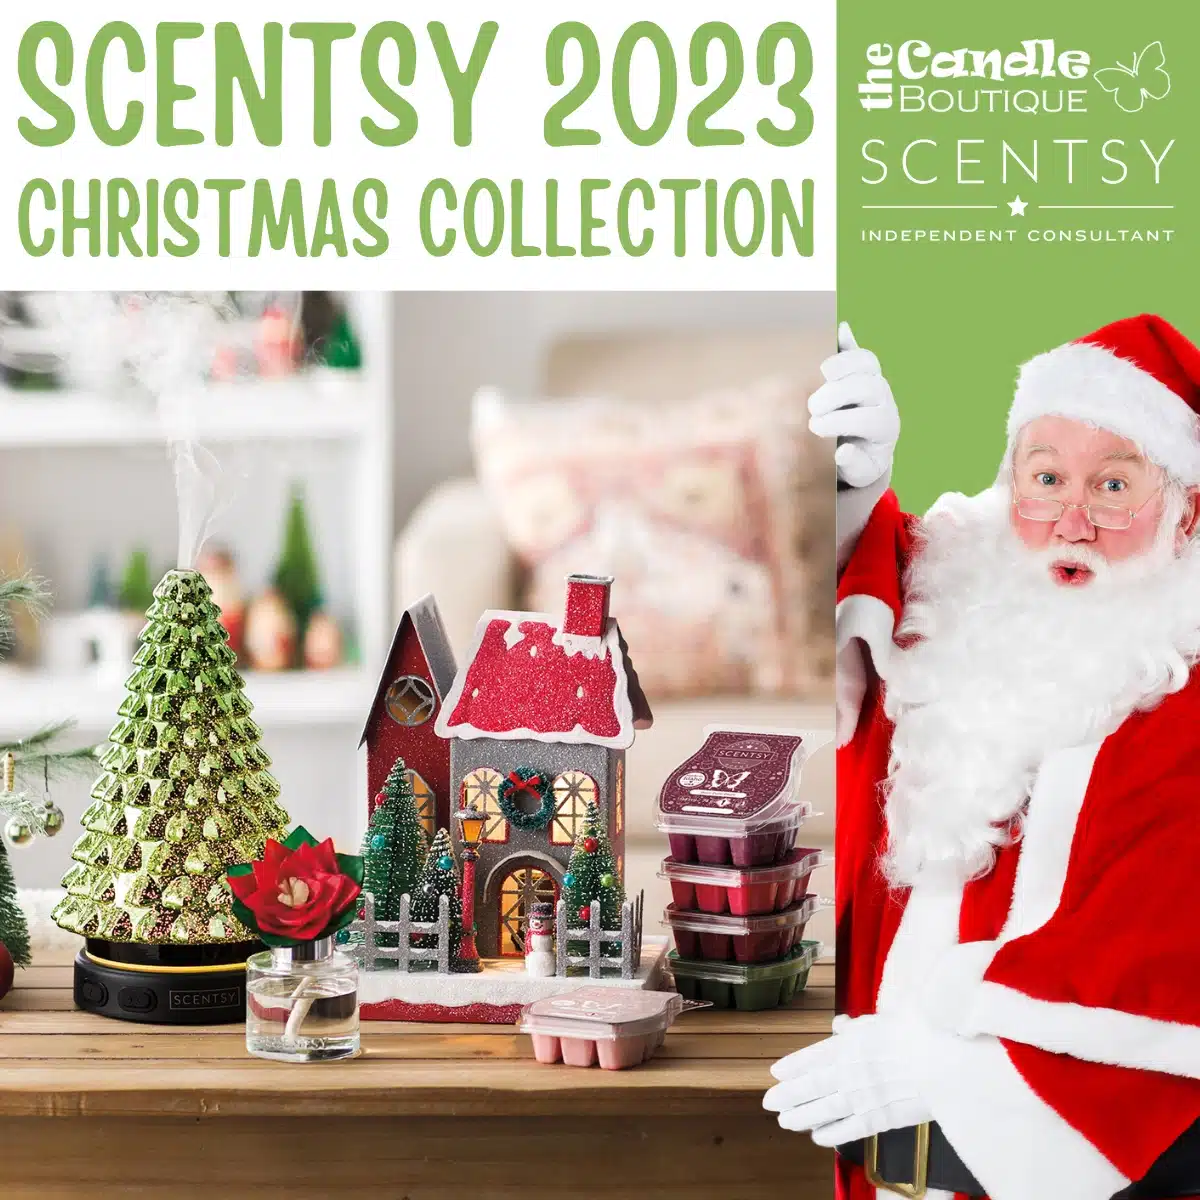 Scentsy 2023 Christmas Collection The Candle Boutique Scentsy UK